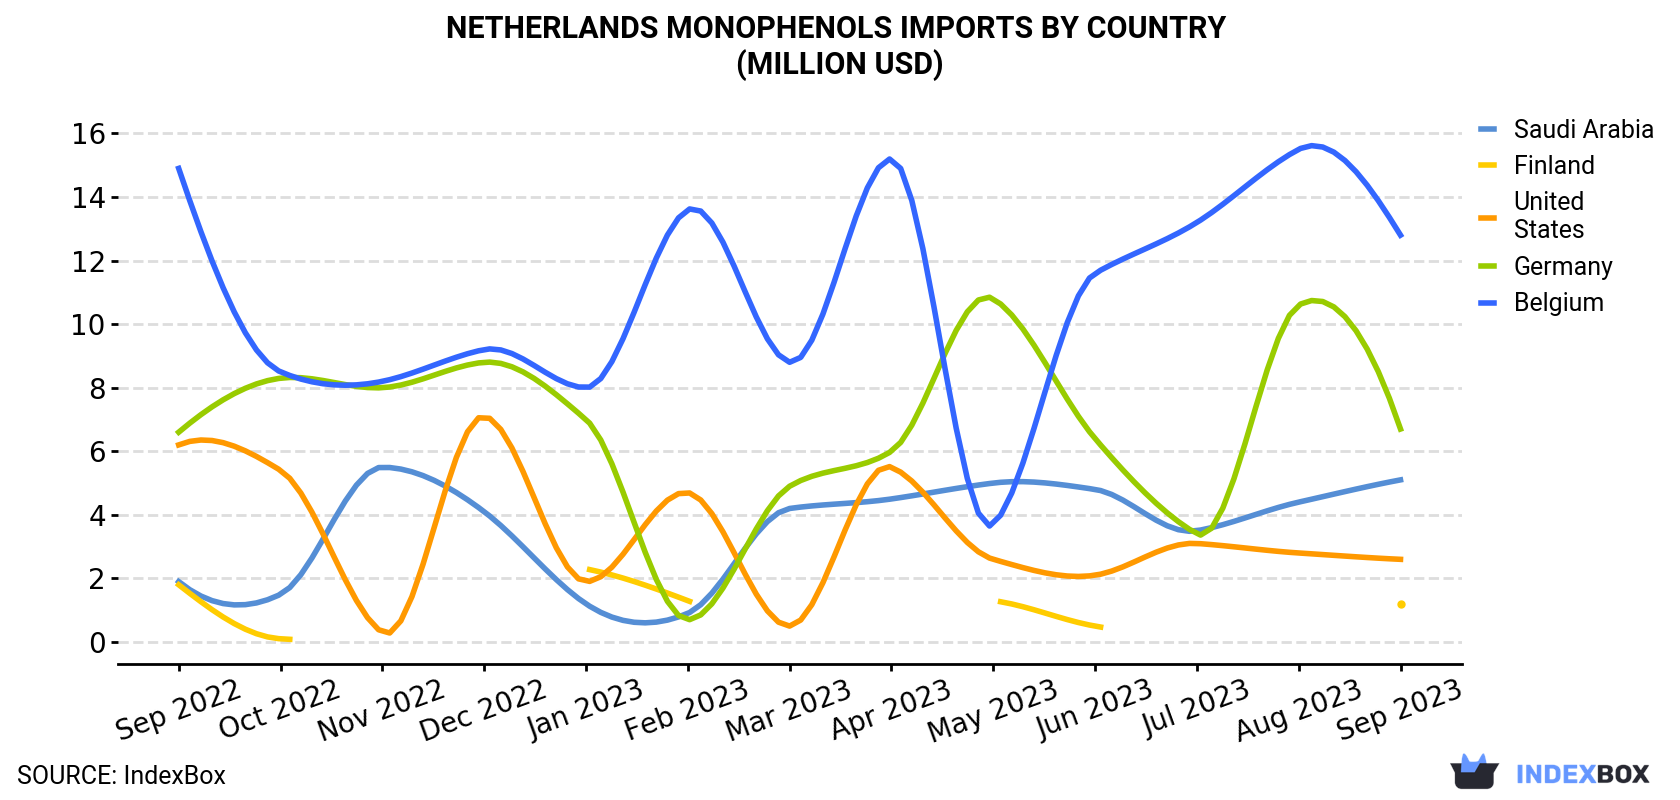 Netherlands Monophenols Imports By Country (Million USD)